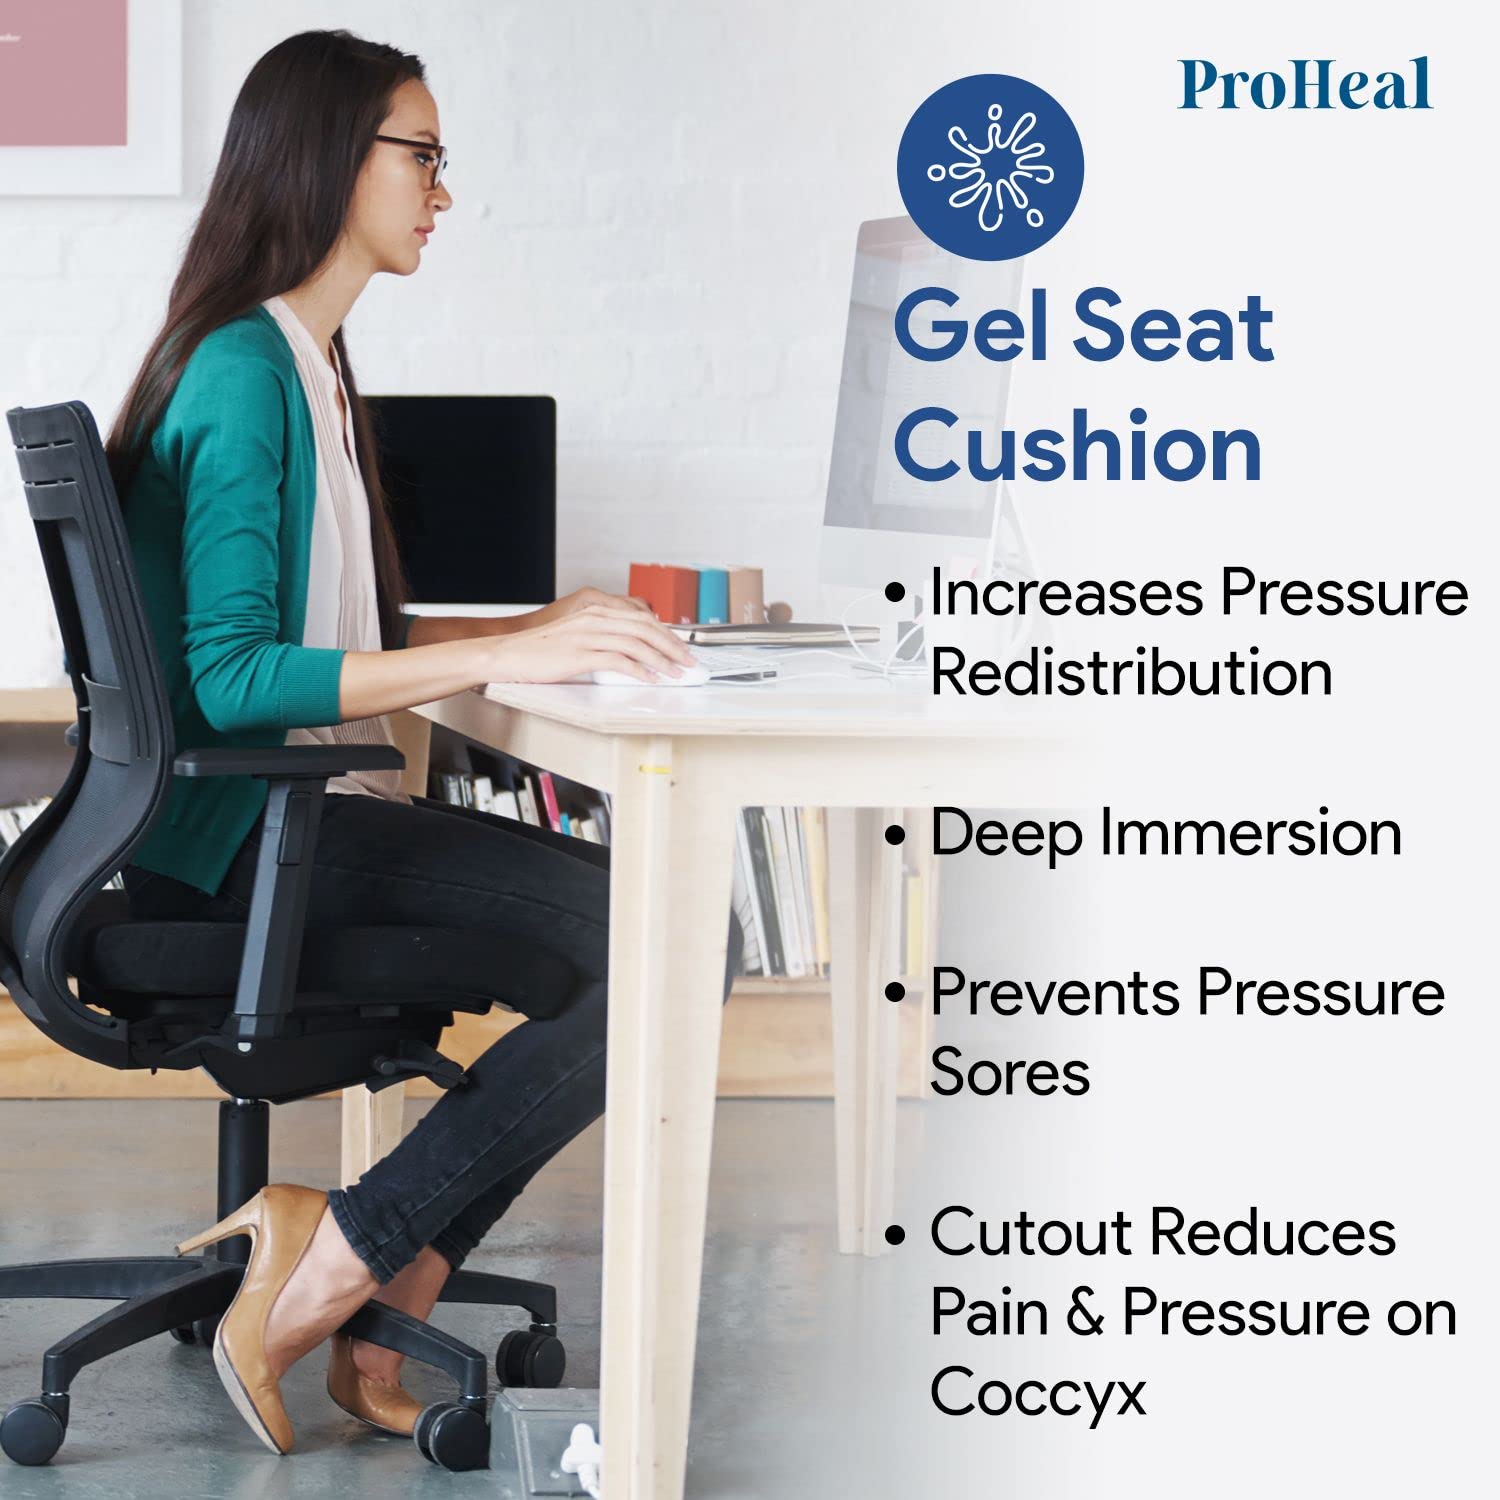 Gel Coccyx Wheelchair Seat Cushion - Tailbone Pressure and Pain Relief - Gel Infused High Density and Resilient Foam with Coccyx Cut Out - 3" Medium Profile - 1 Year Warranty  - Like New